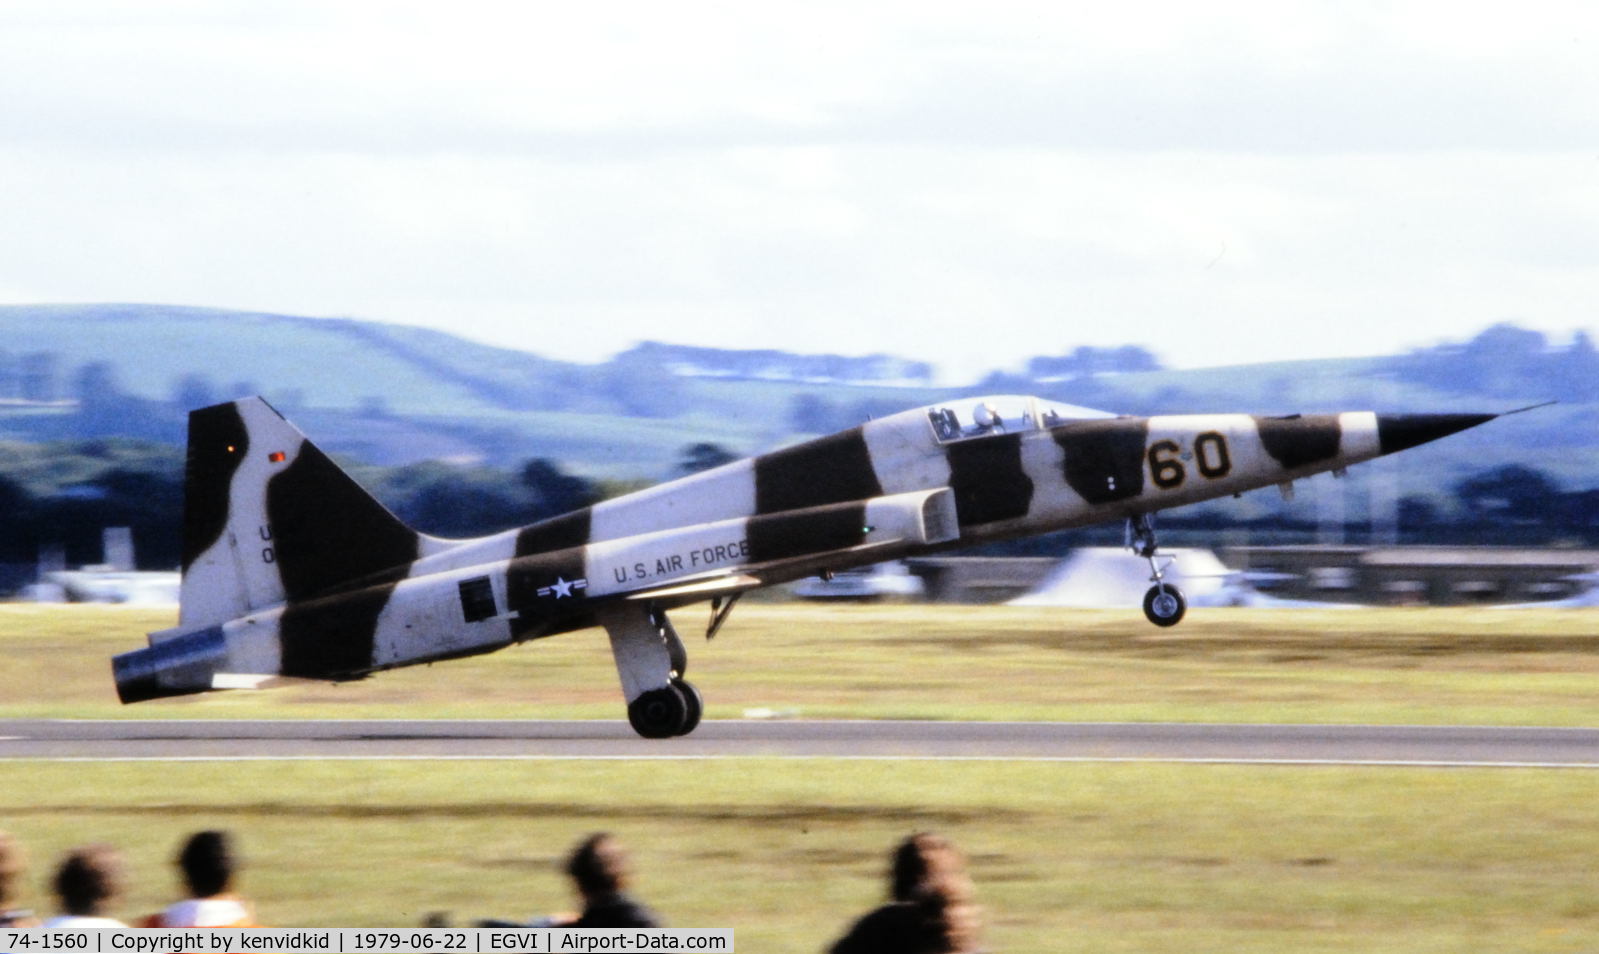 74-1560, 1974 Northrop F-5E Tiger II C/N R.1231, At the 1979 International Air Tattoo Greenham Common, copied from slide.